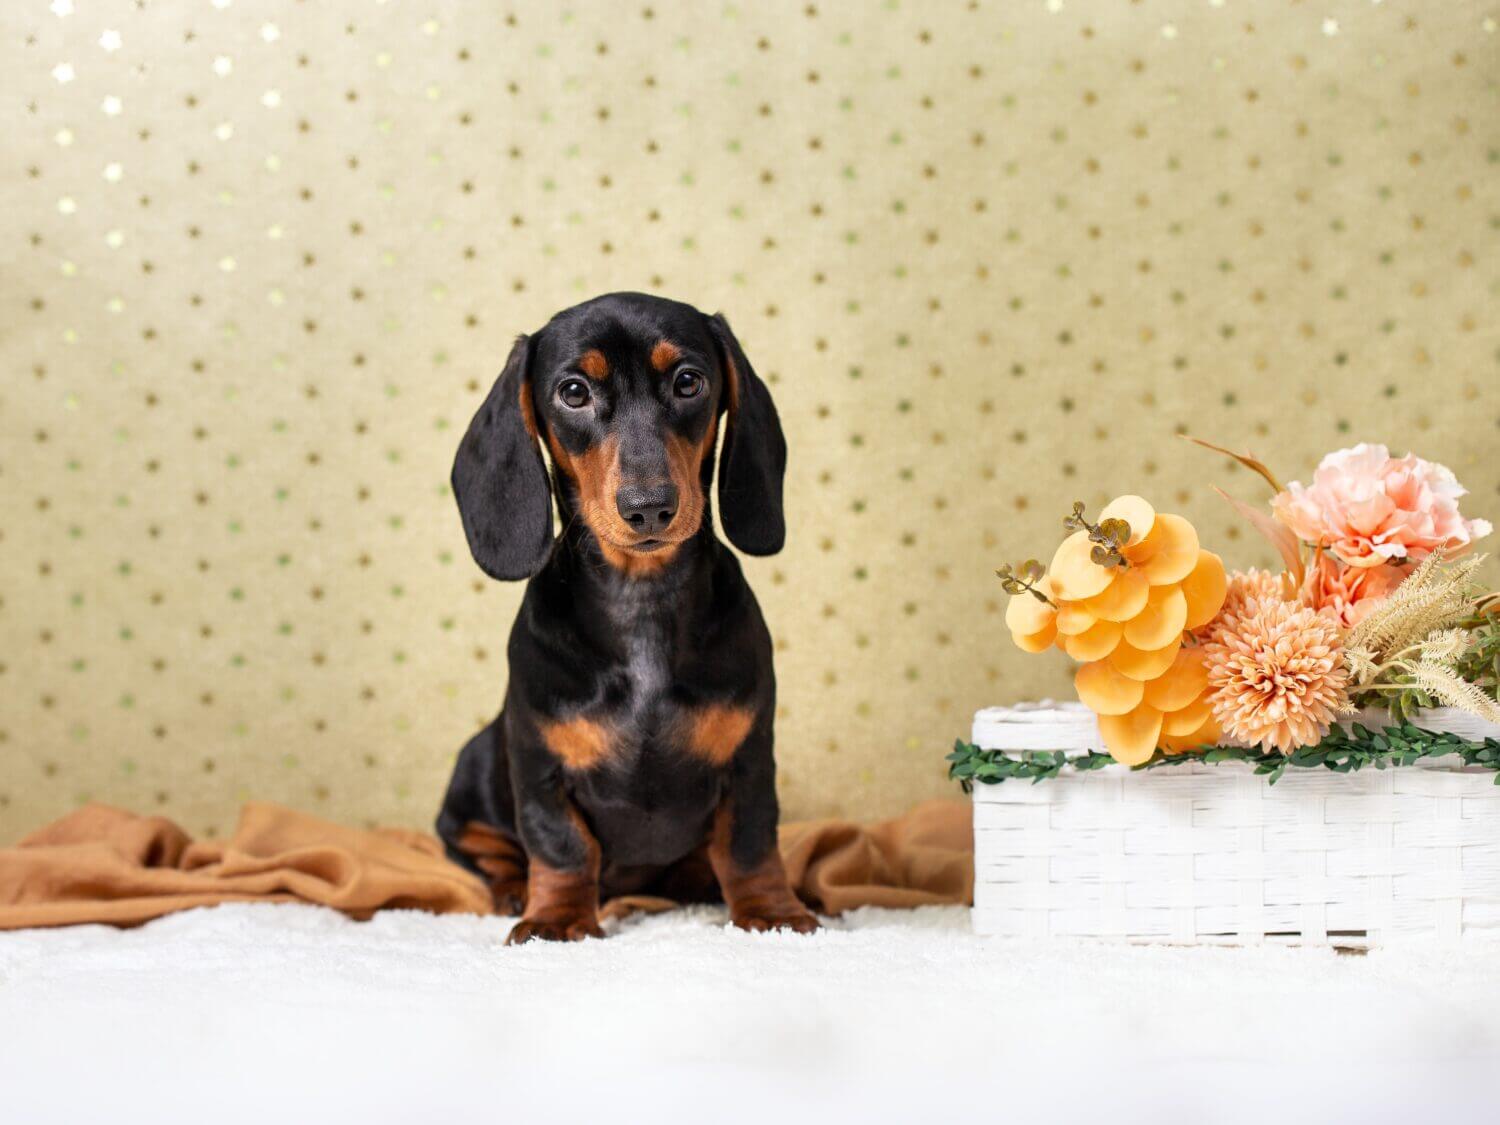 Black and Tan cute mini dachshund puppy portrait with flowers